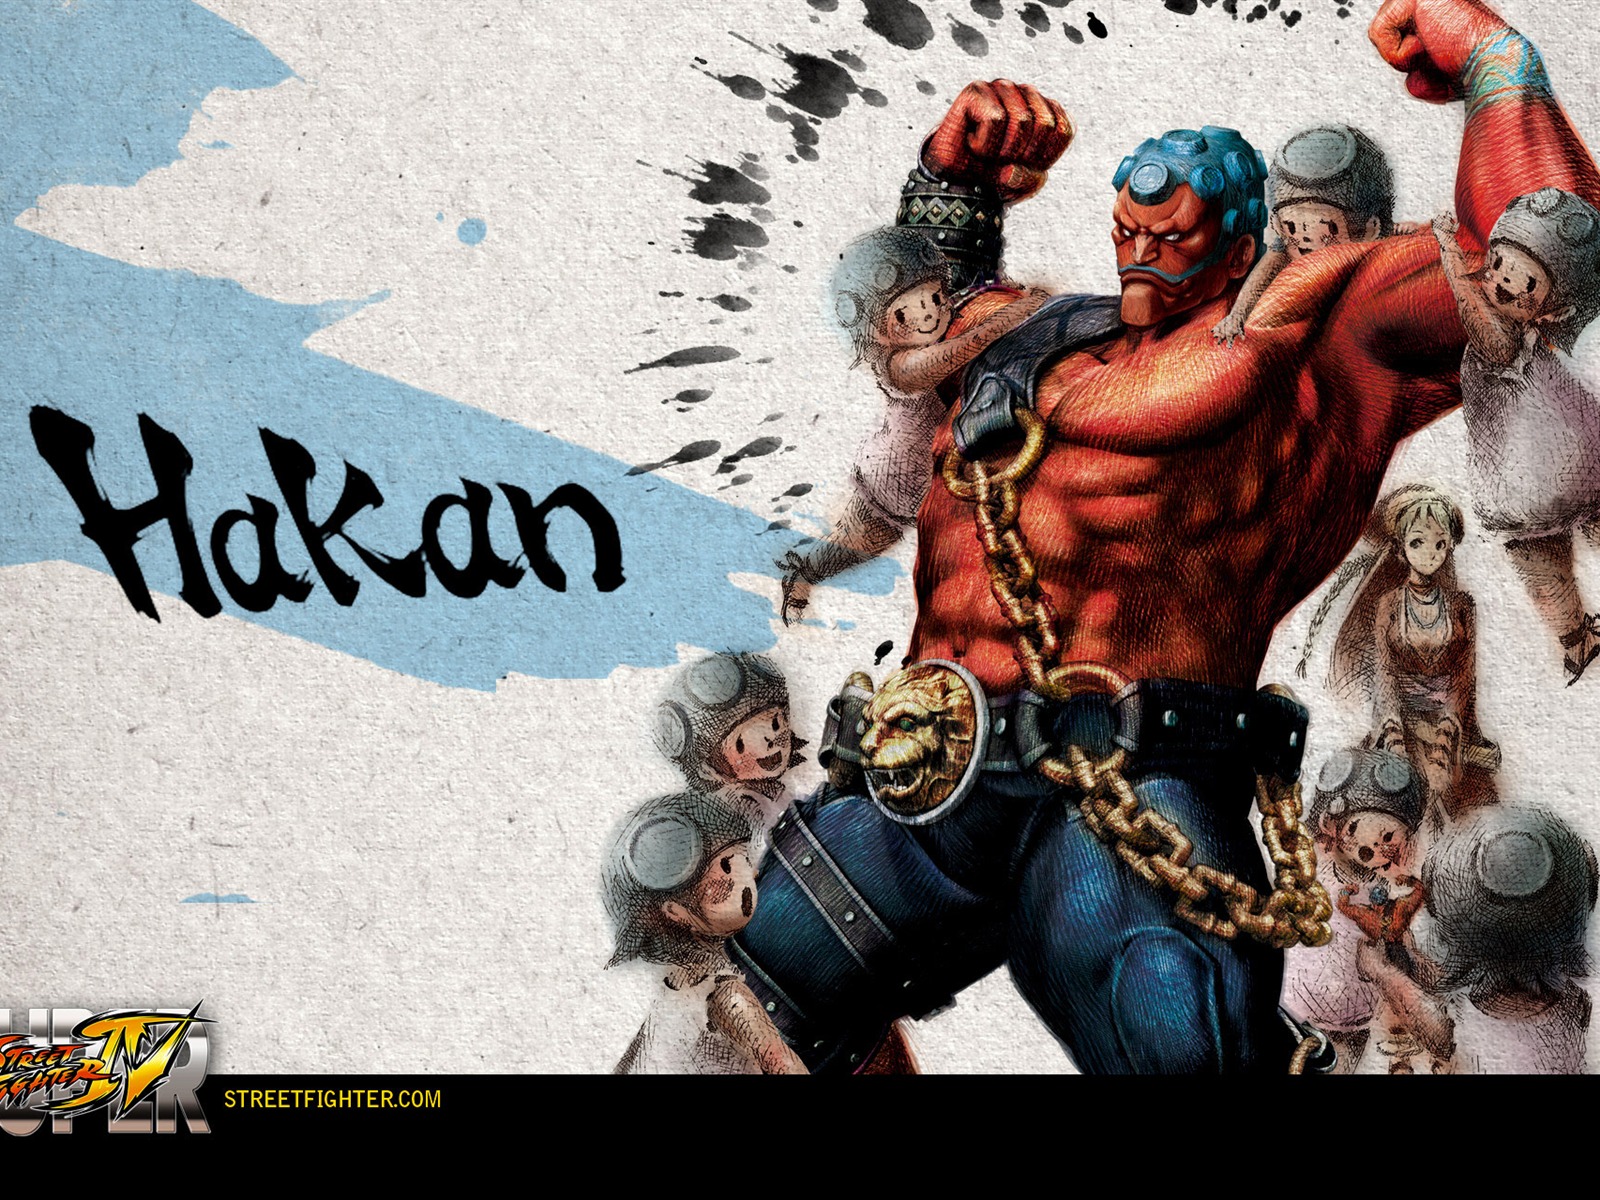 Super Street Fighter 4 Ink Chinese style wallpaper #13 - 1600x1200